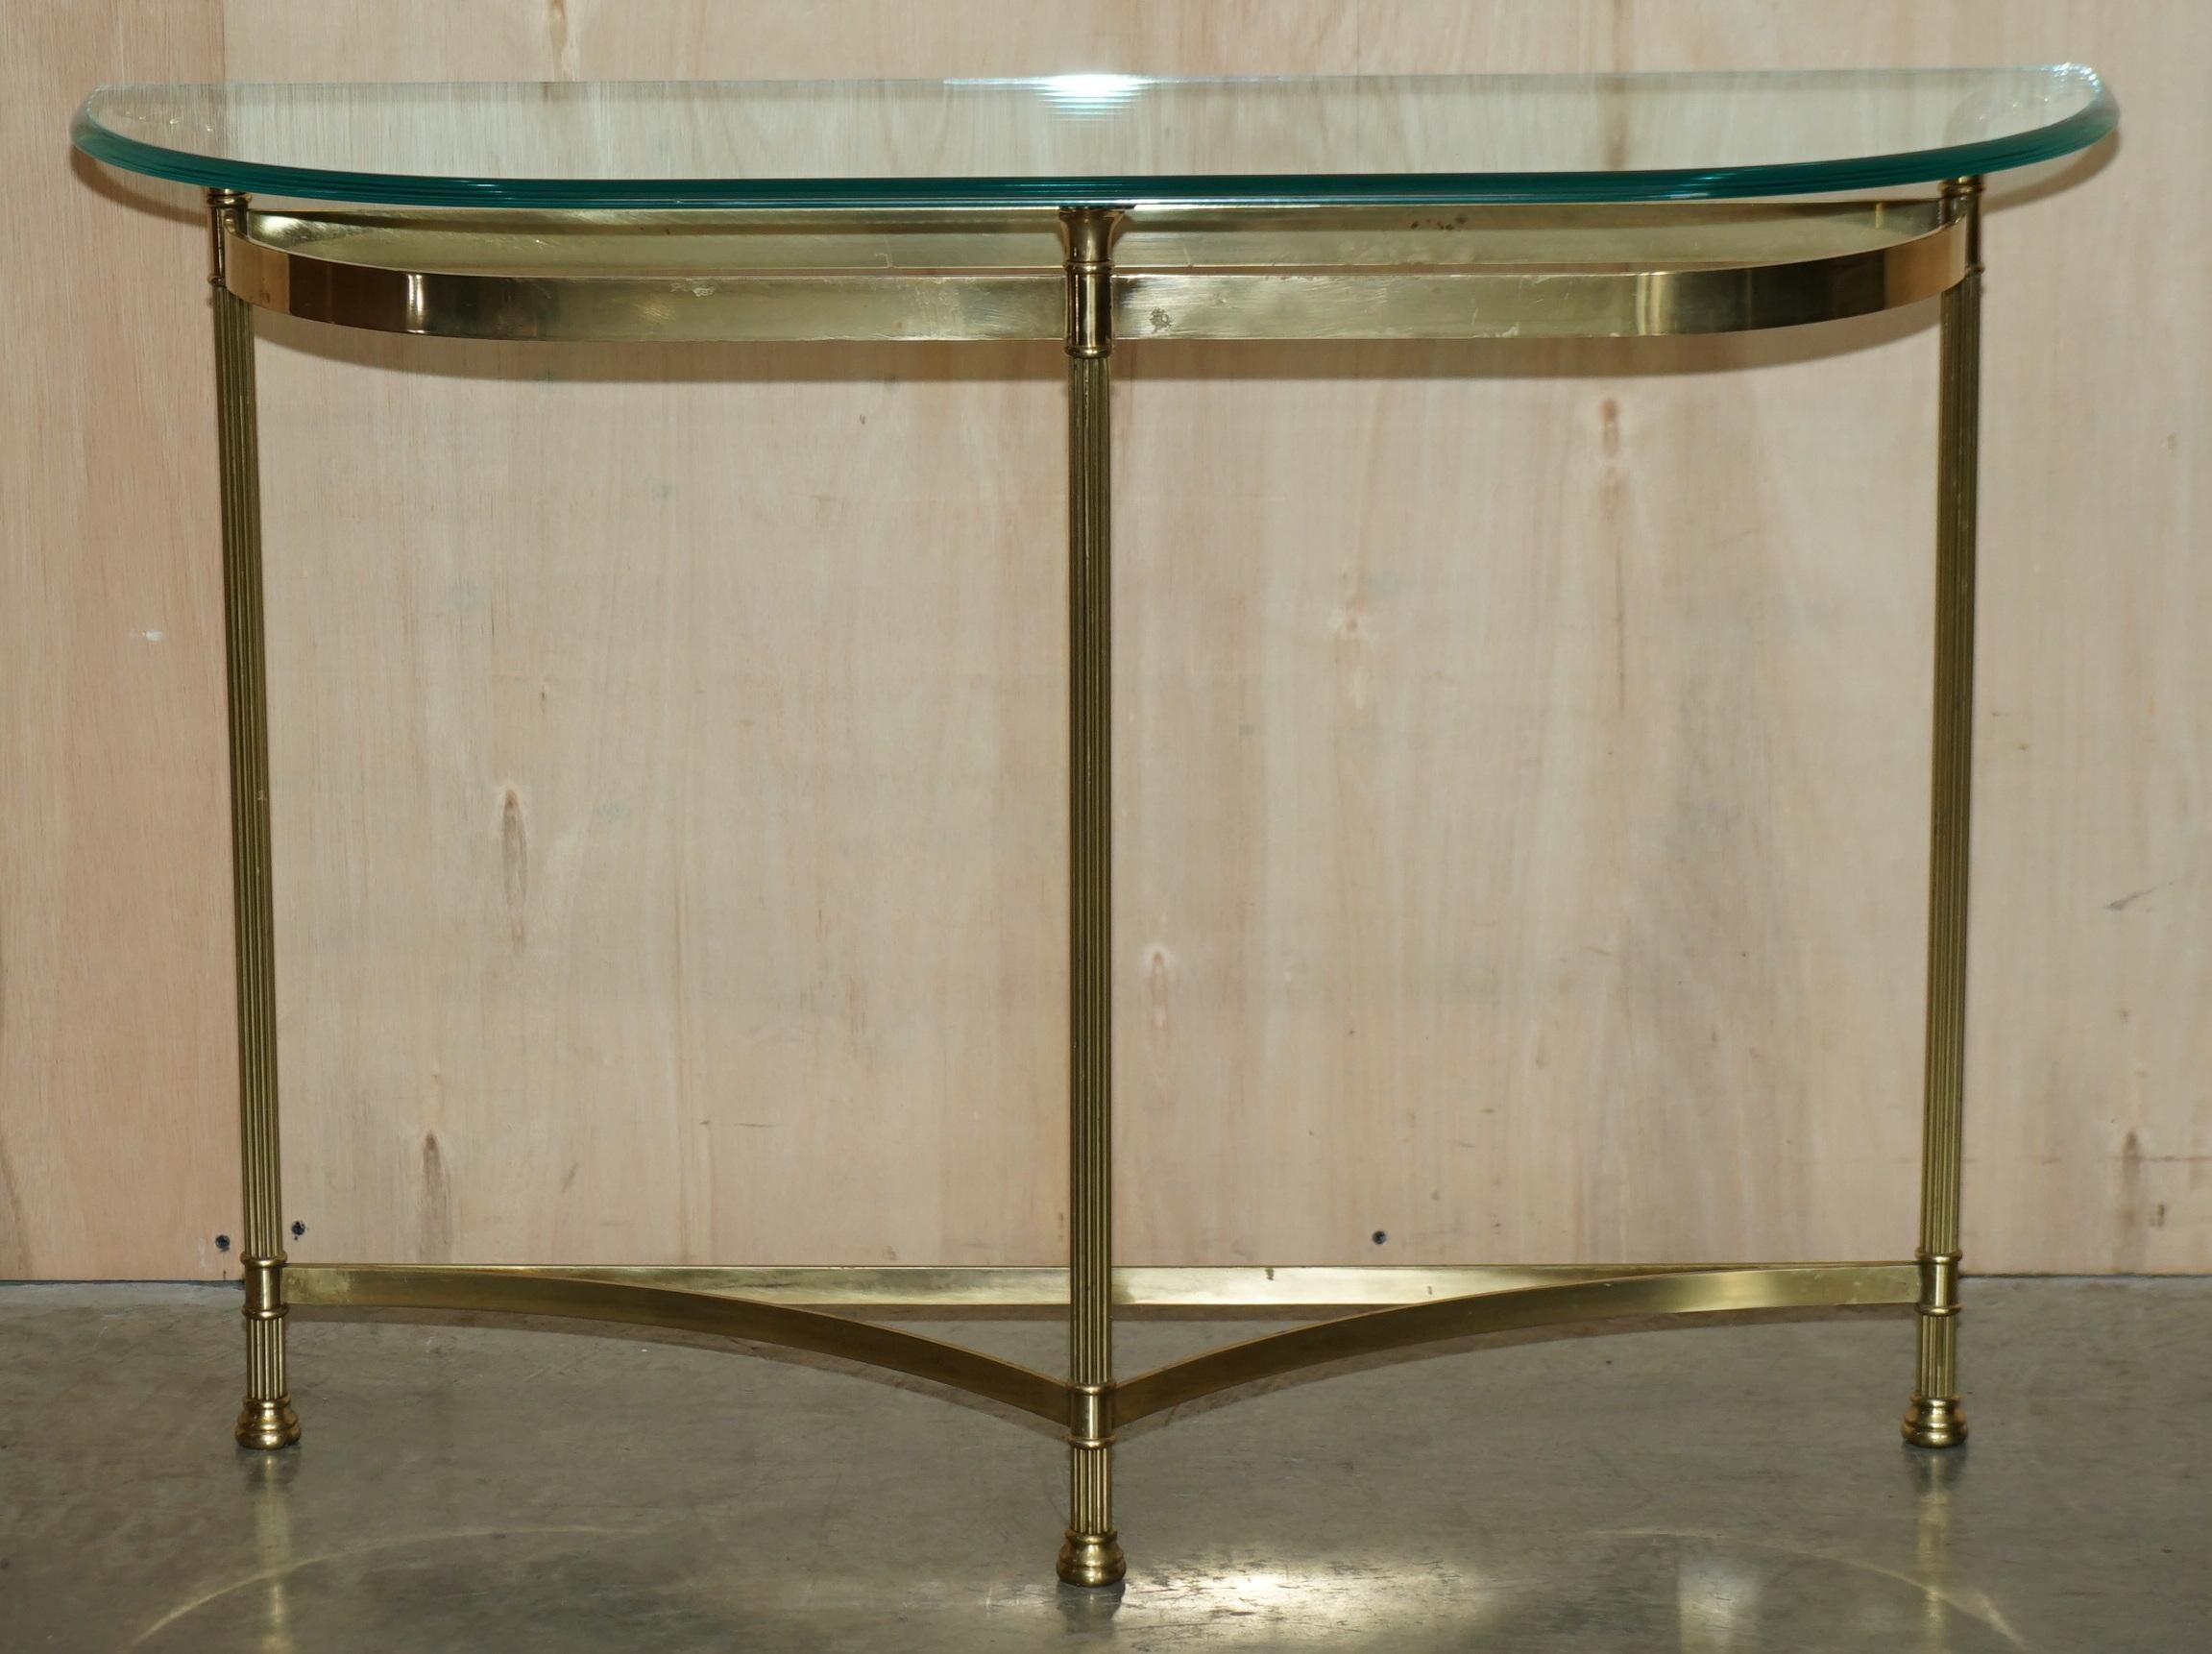 We are delighted to offer for sale this very fine, circa 1950’s Mid Century Modern brass and glass demi lune consoles table.

A good looking well made and decorative piece, the beauty of this piece is in the subtle detailing, it has wonderful